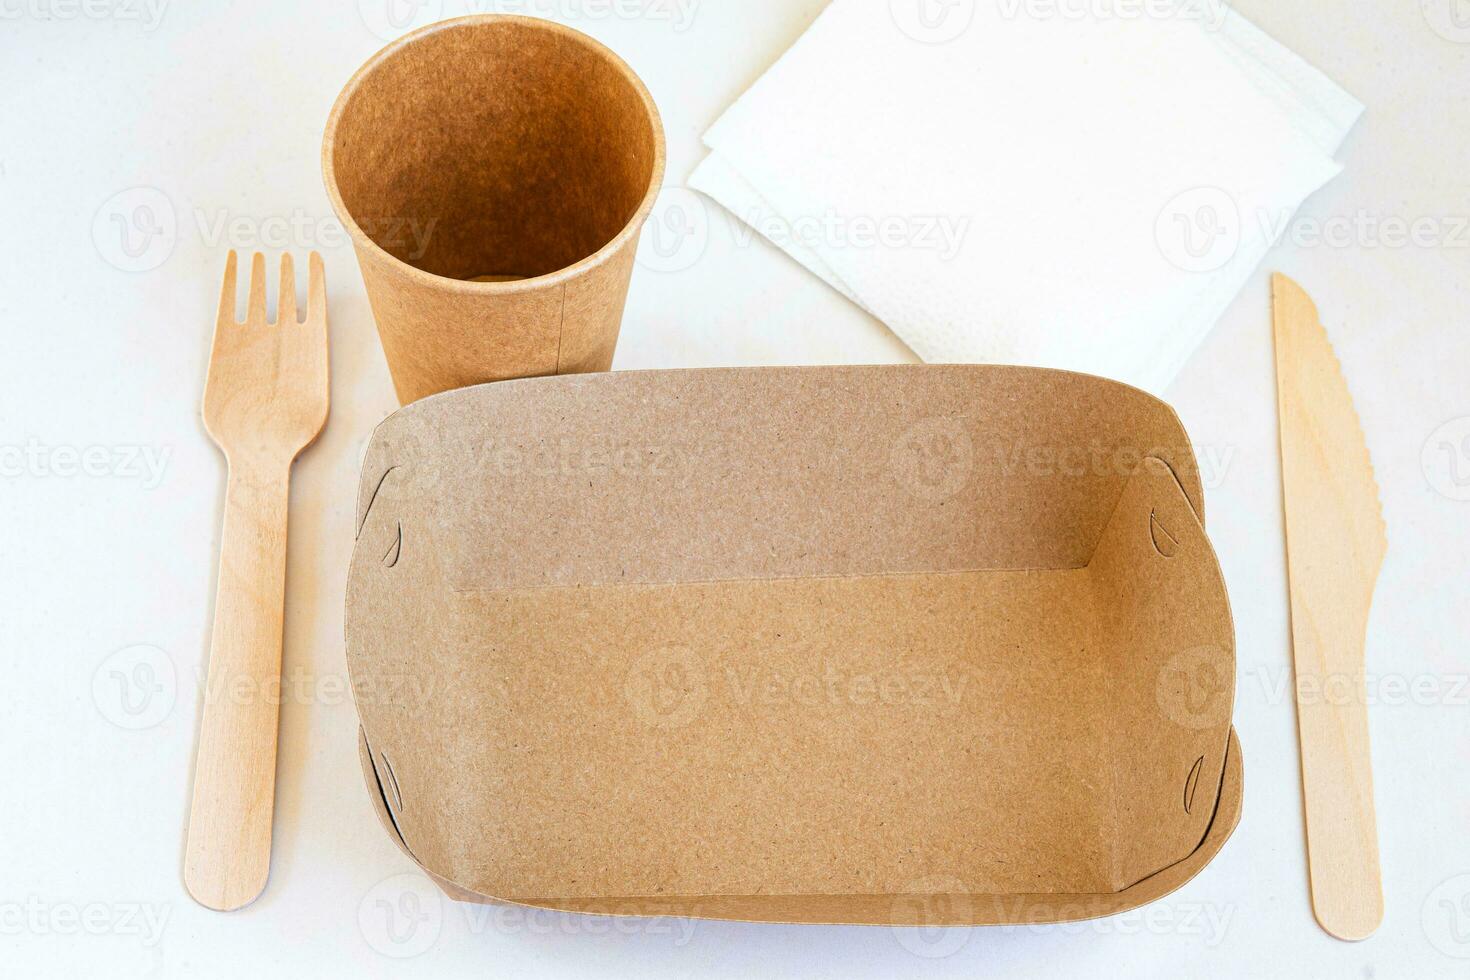 Disposable environmentally eco friendly food packaging. Brown craft paper containers, drink glasses, forks and knifes. Mockup, template photo